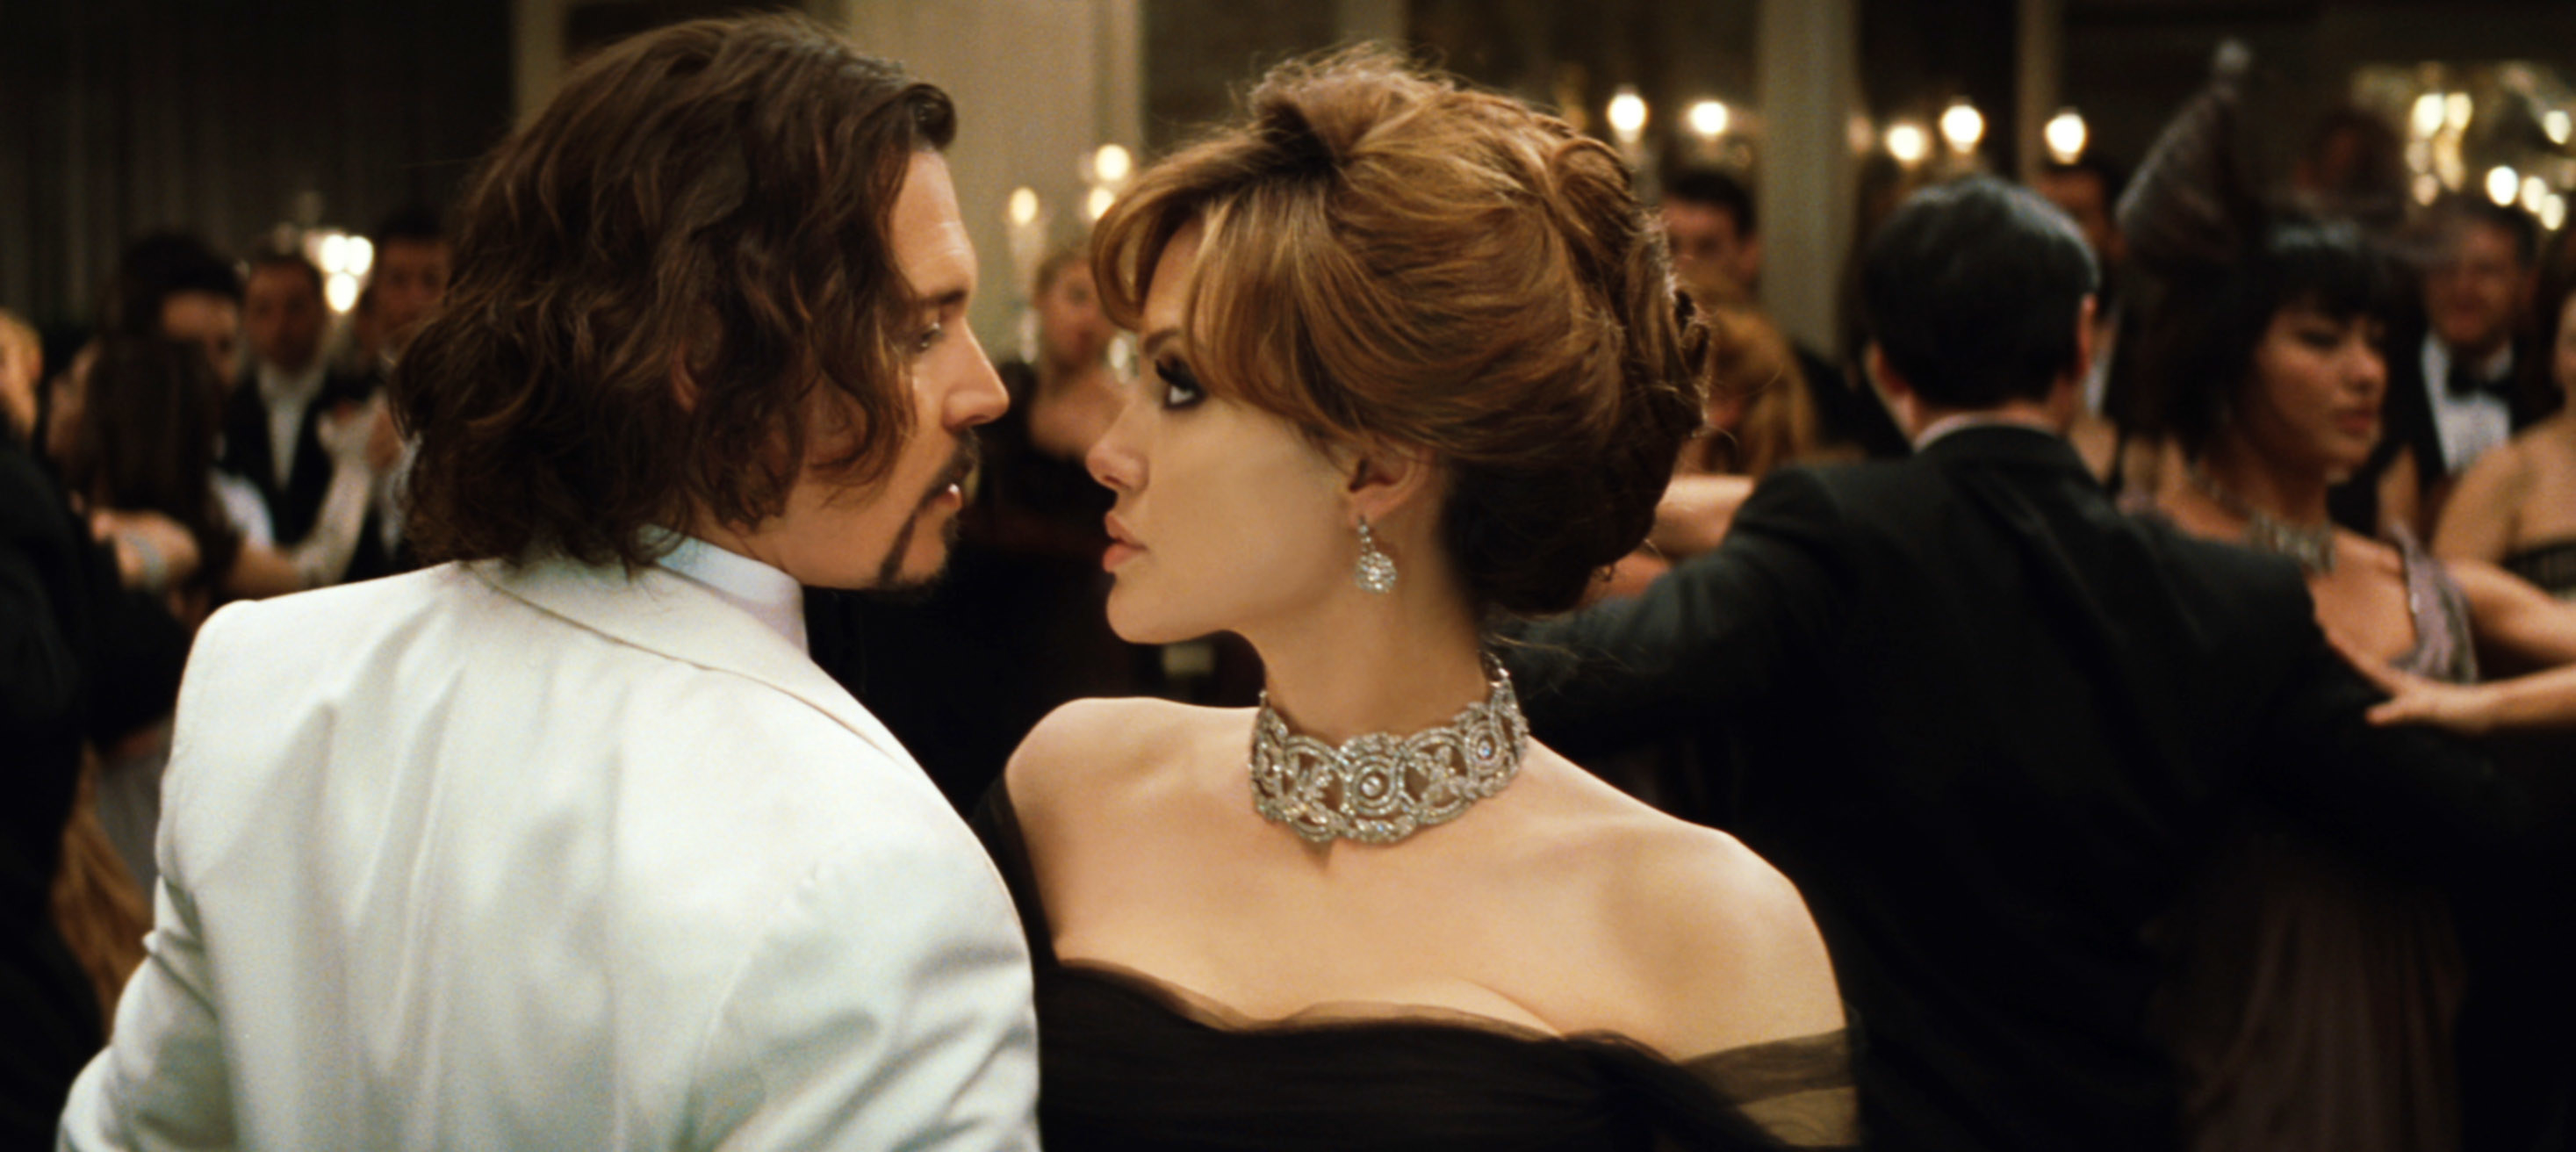 Johnny Depp and Angelina Jolie dance in a crowded ballroom in The Tourist